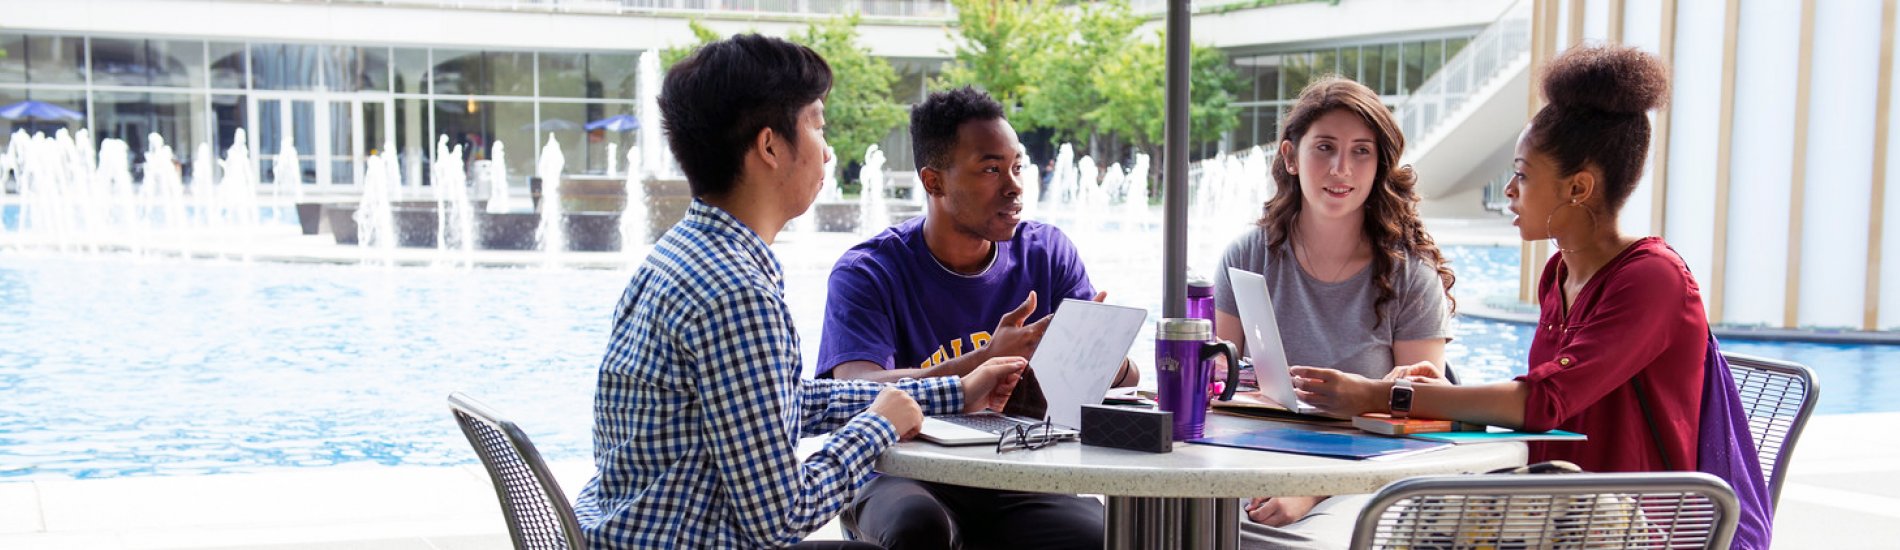 A group of four students studying at a table next to UAlbany's main fountain.